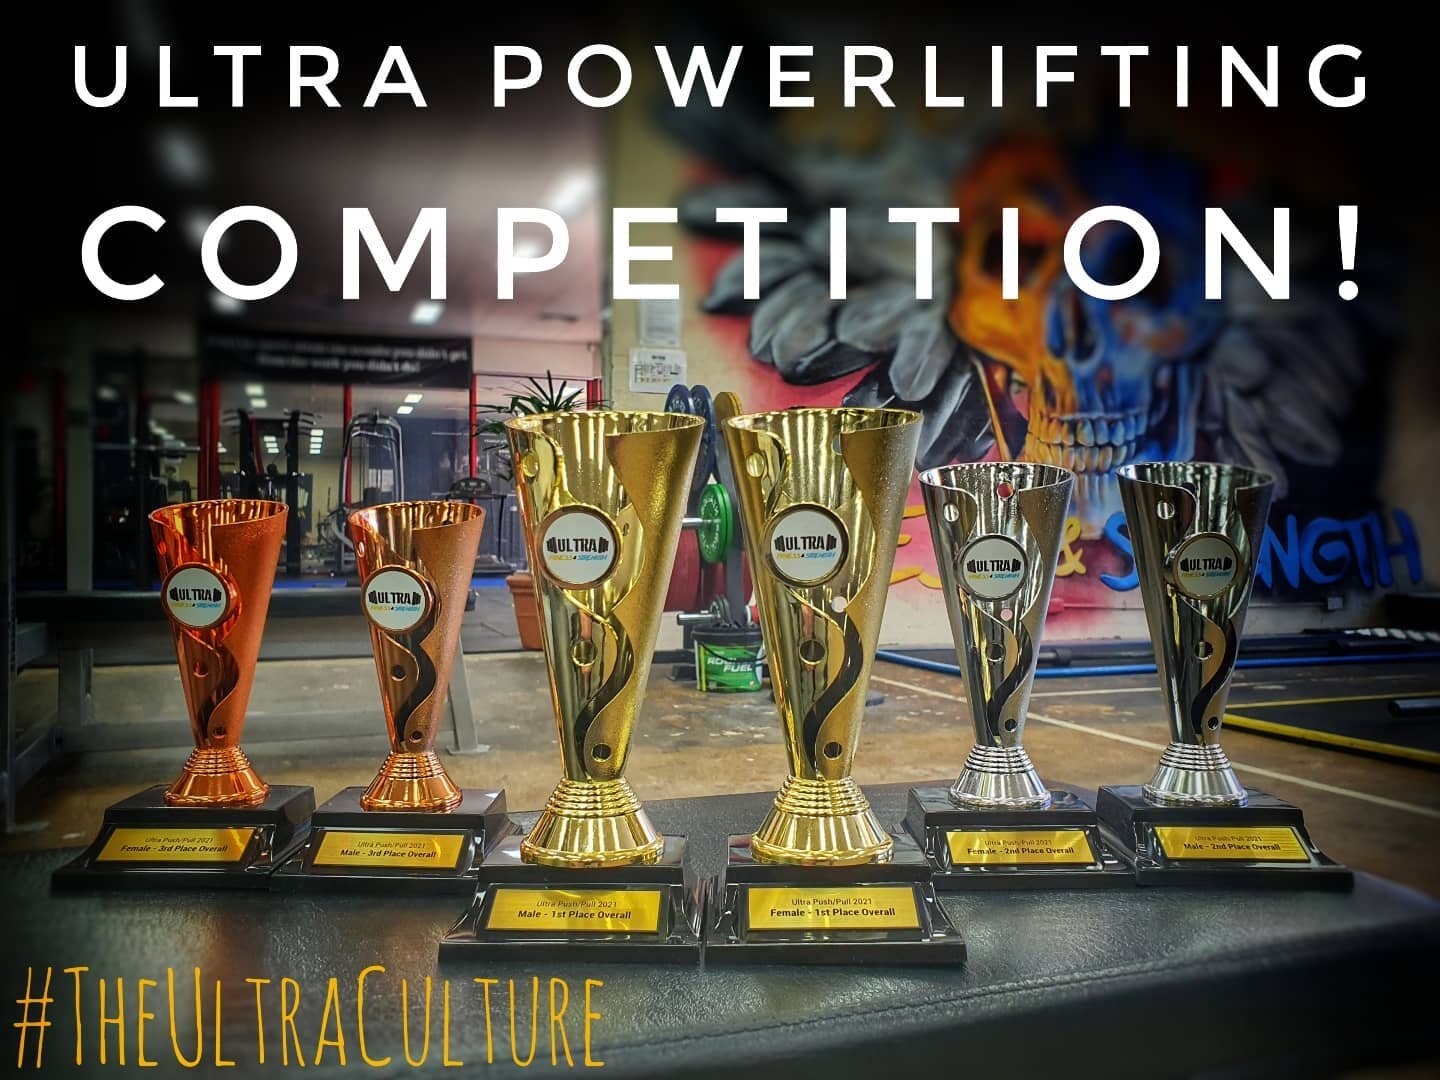 ULTRA PUSH/PULL - 27th March 2022! Entries to open 12 weeks out, Save the date!🥳💪.
-
#TheUltraCulture #UltraPushPull